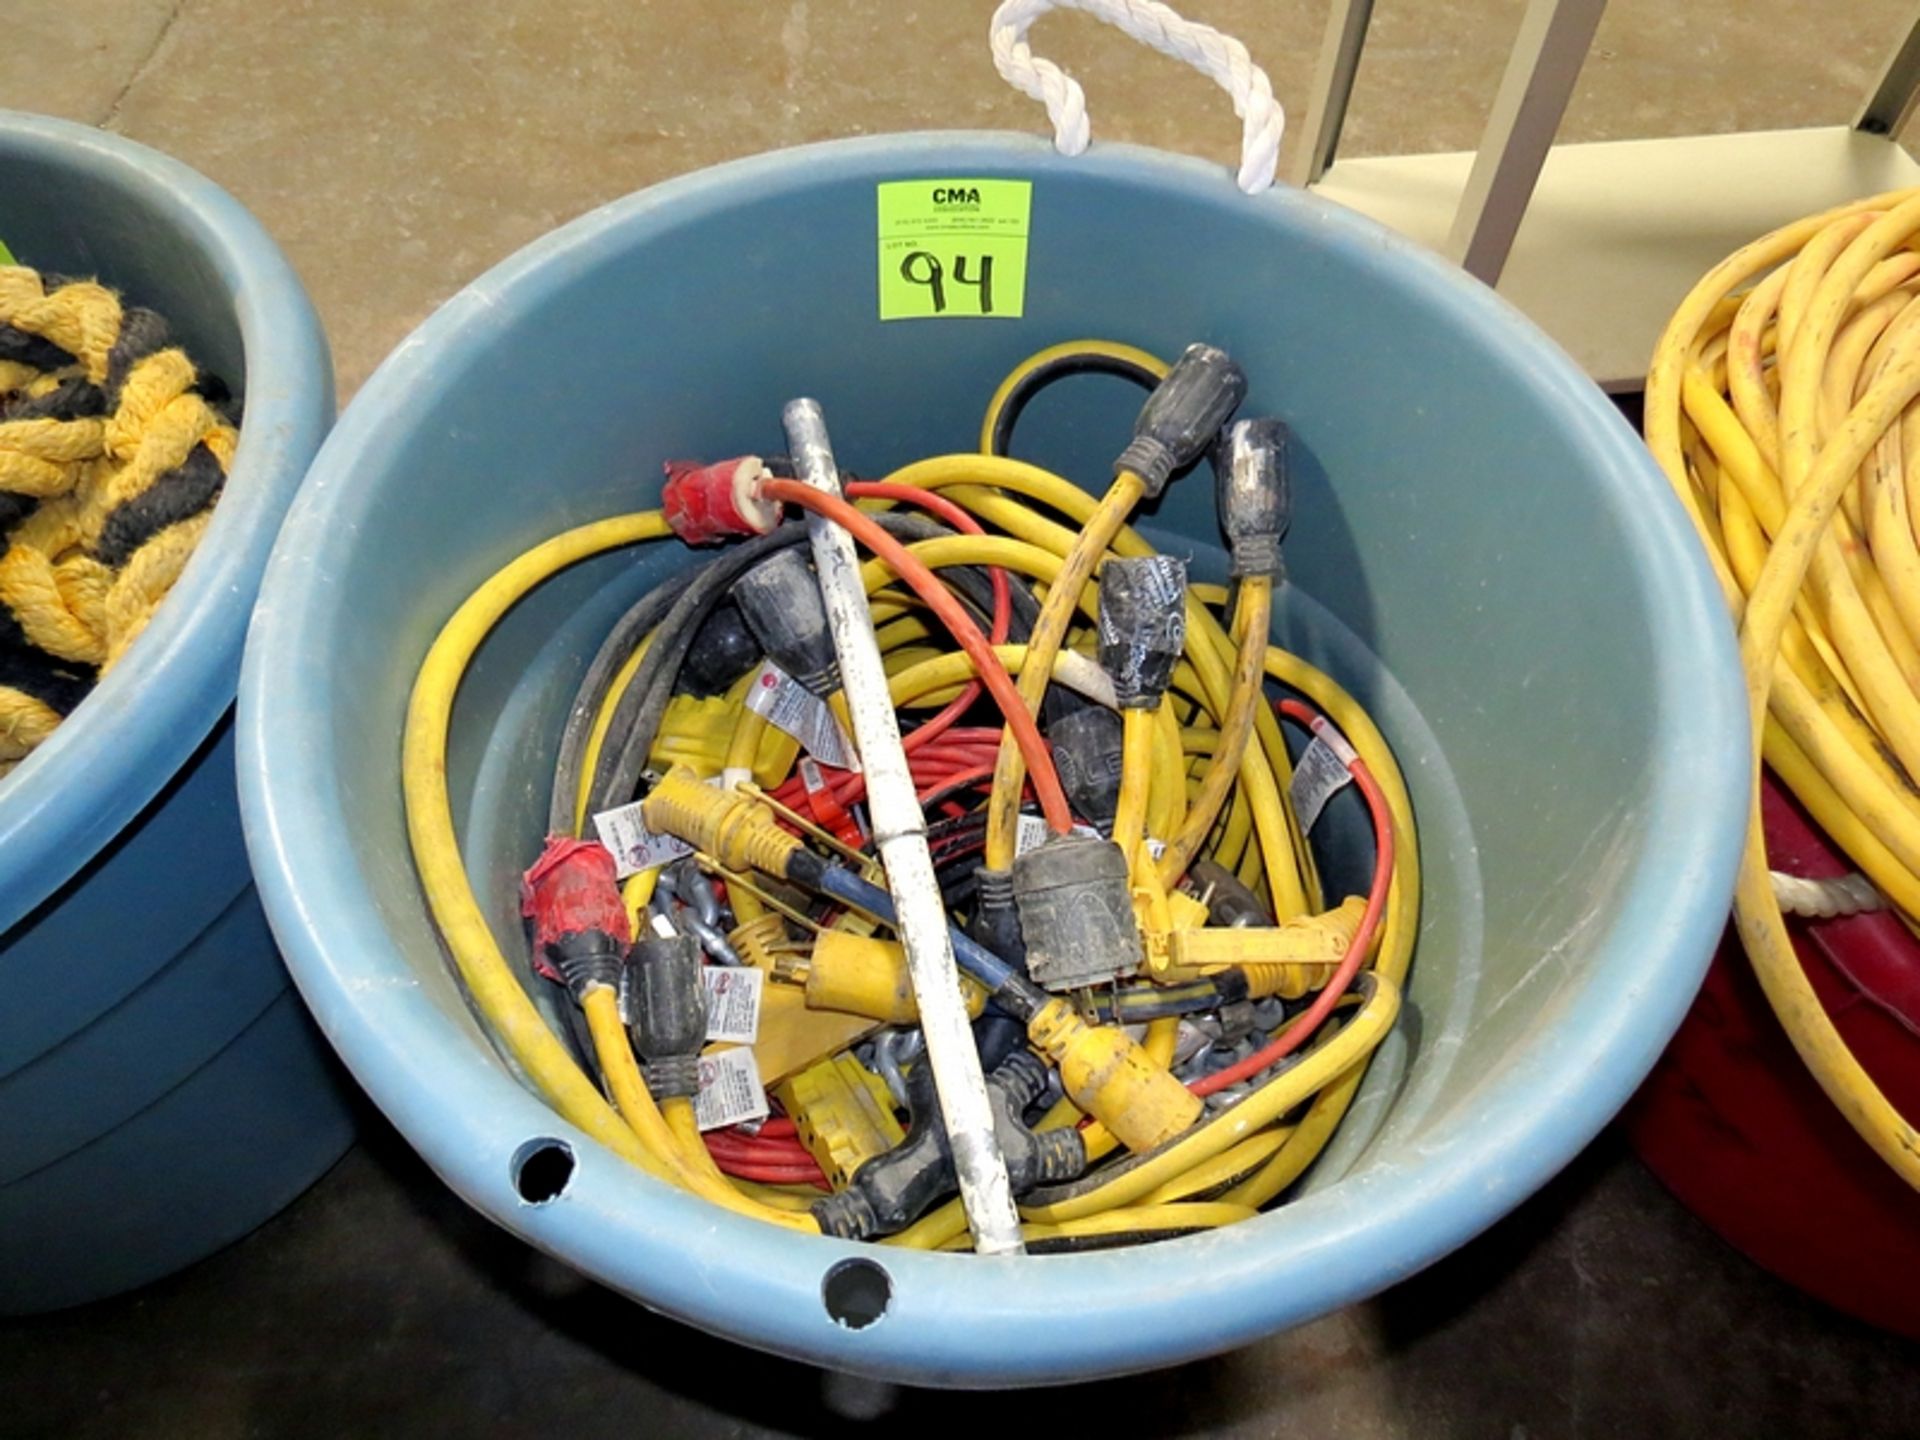 Lot of Electrical Connectors